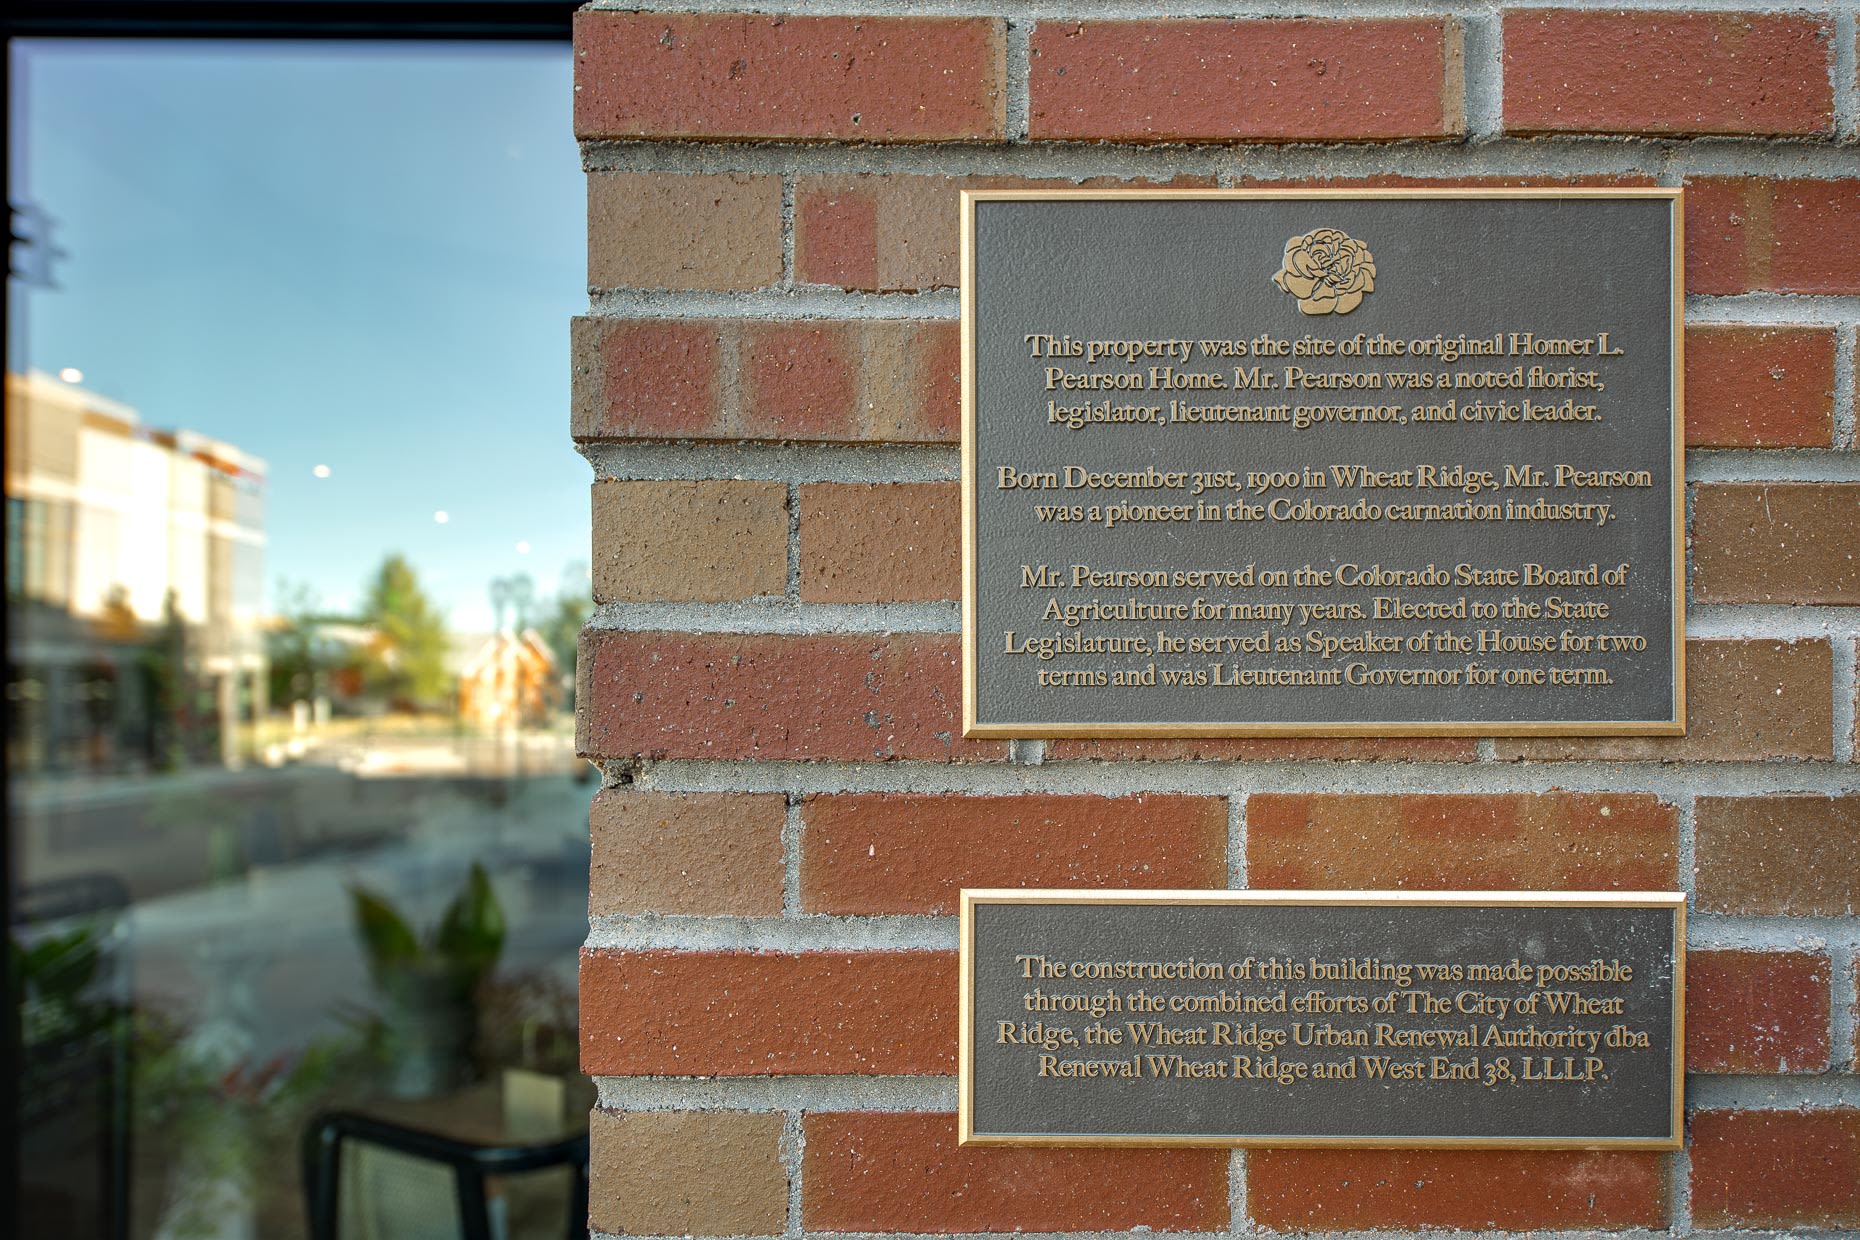 Historical plaque on the exterior at West 38 in Wheat Ridge, Colorado